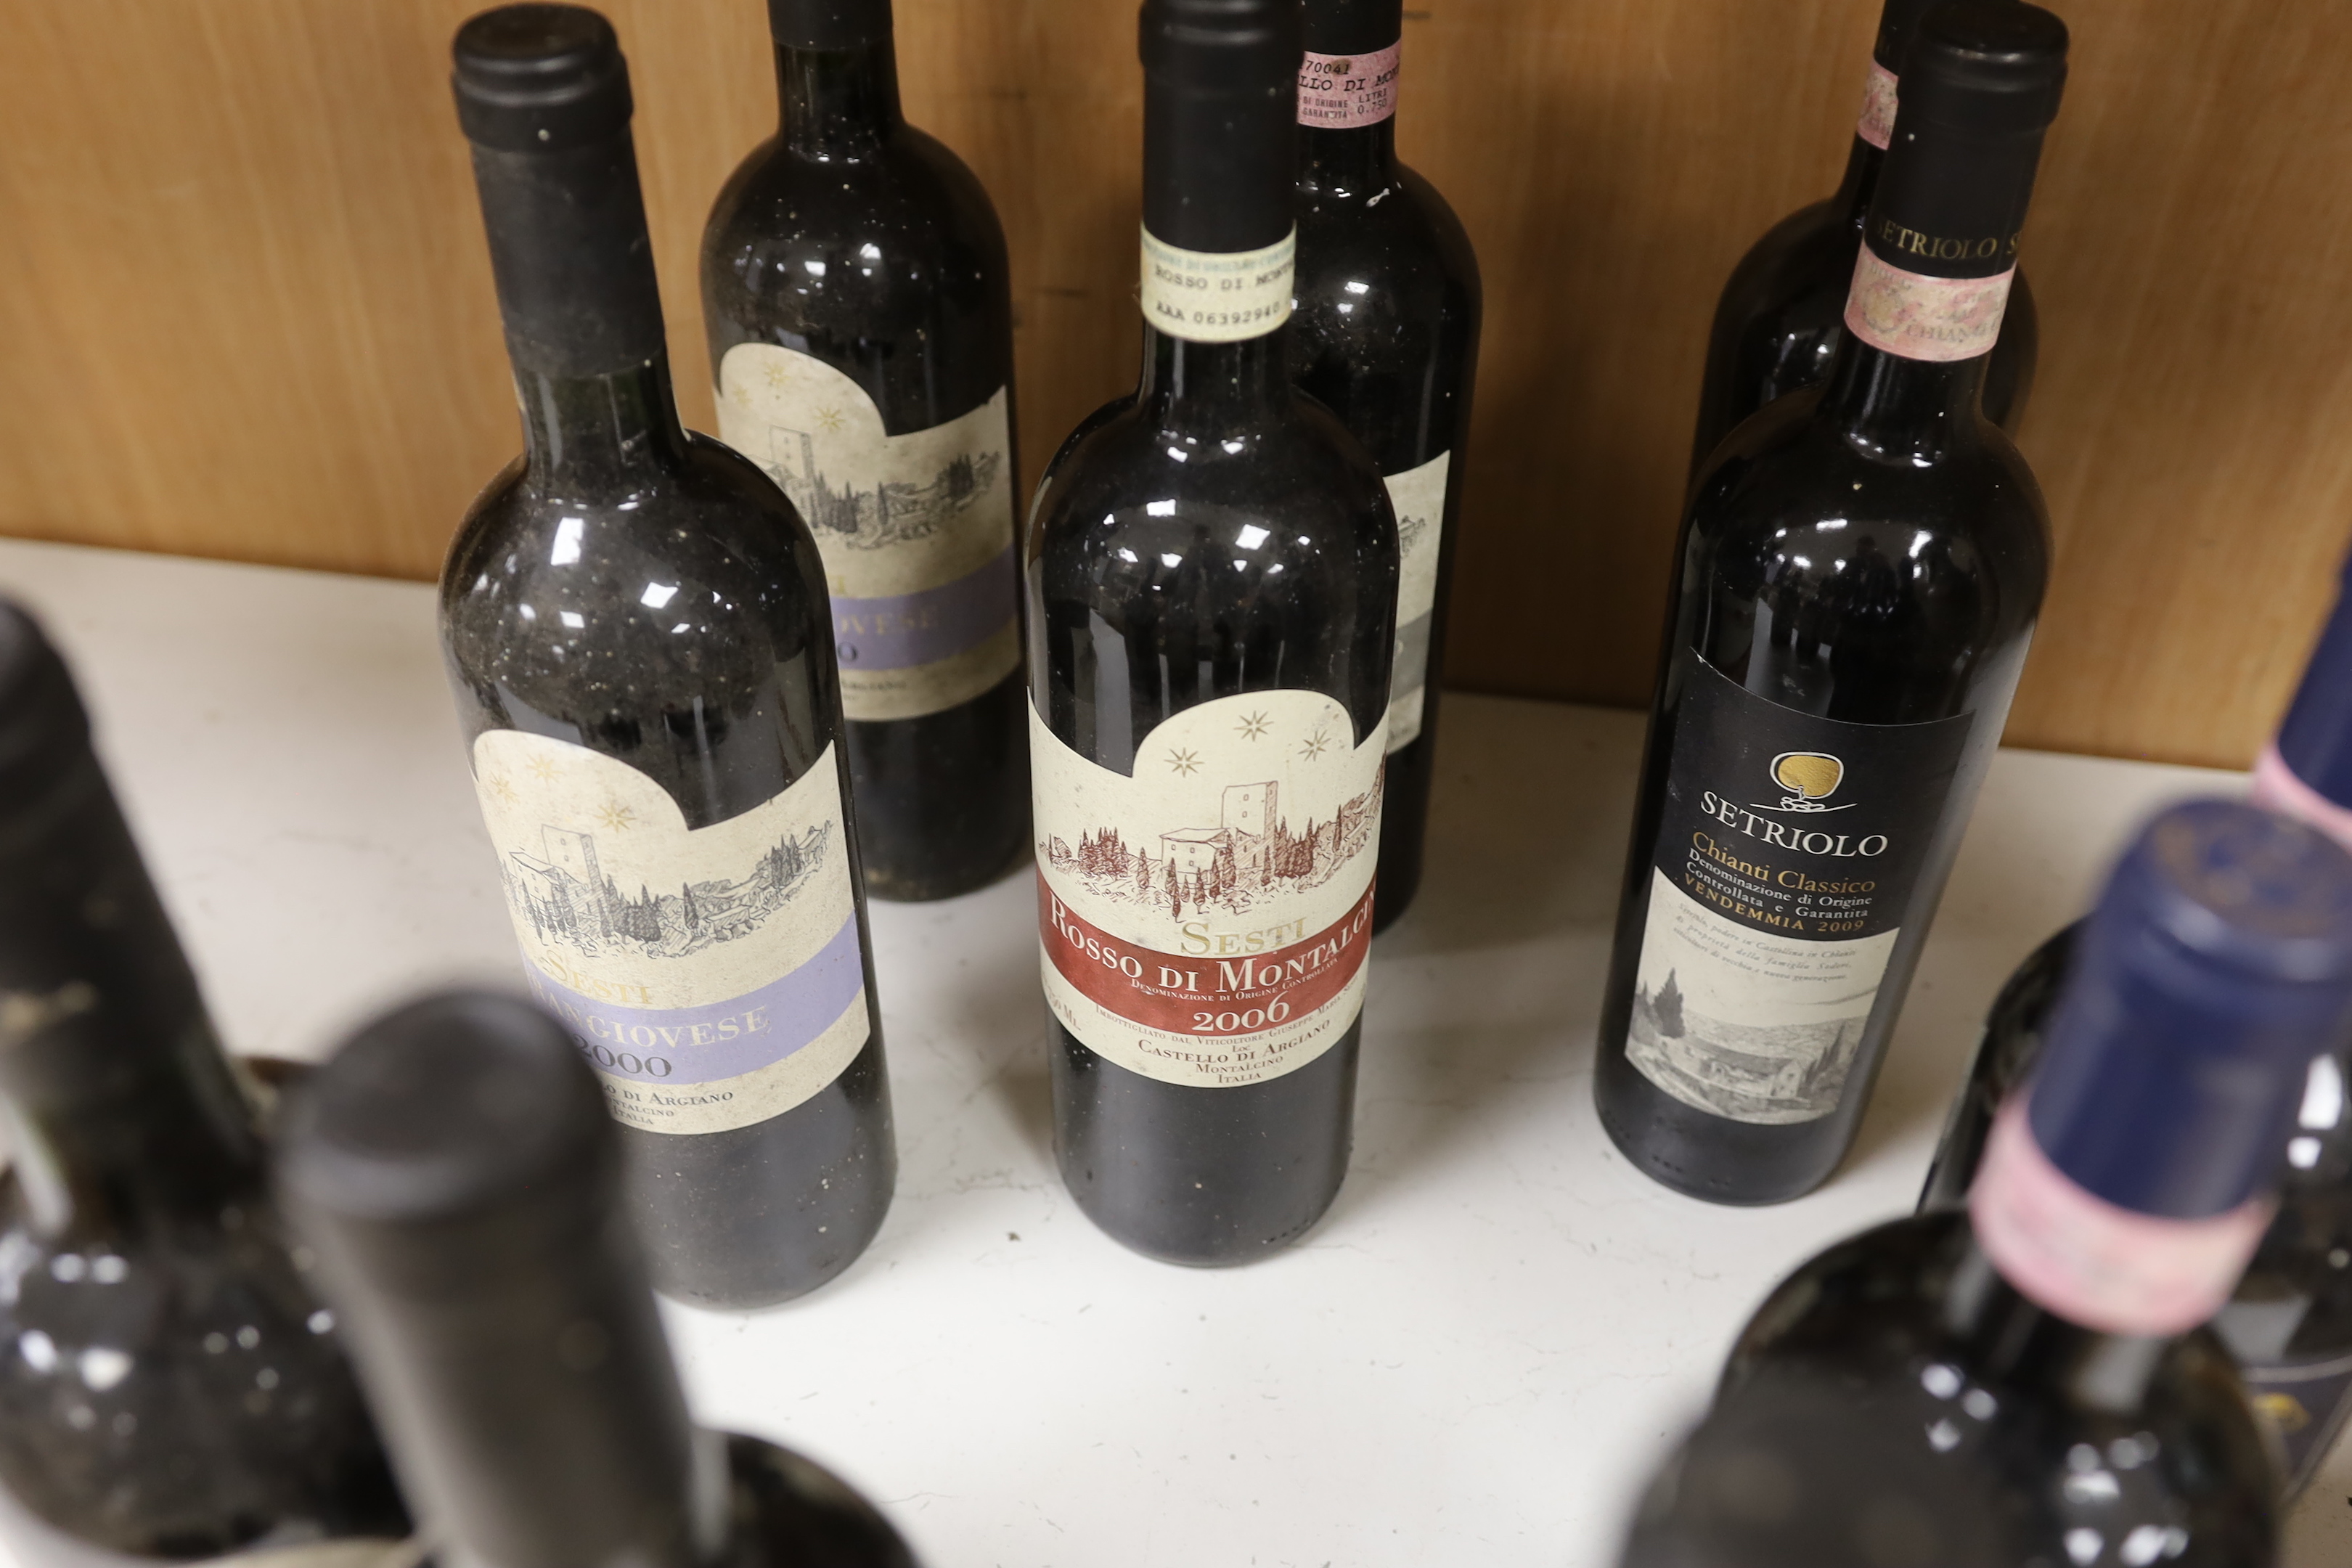 Eleven bottles of various wines to include four bottles of Grangiovese 2000, Rossi di Montalcino1998, 2000, 2006 and four other wines